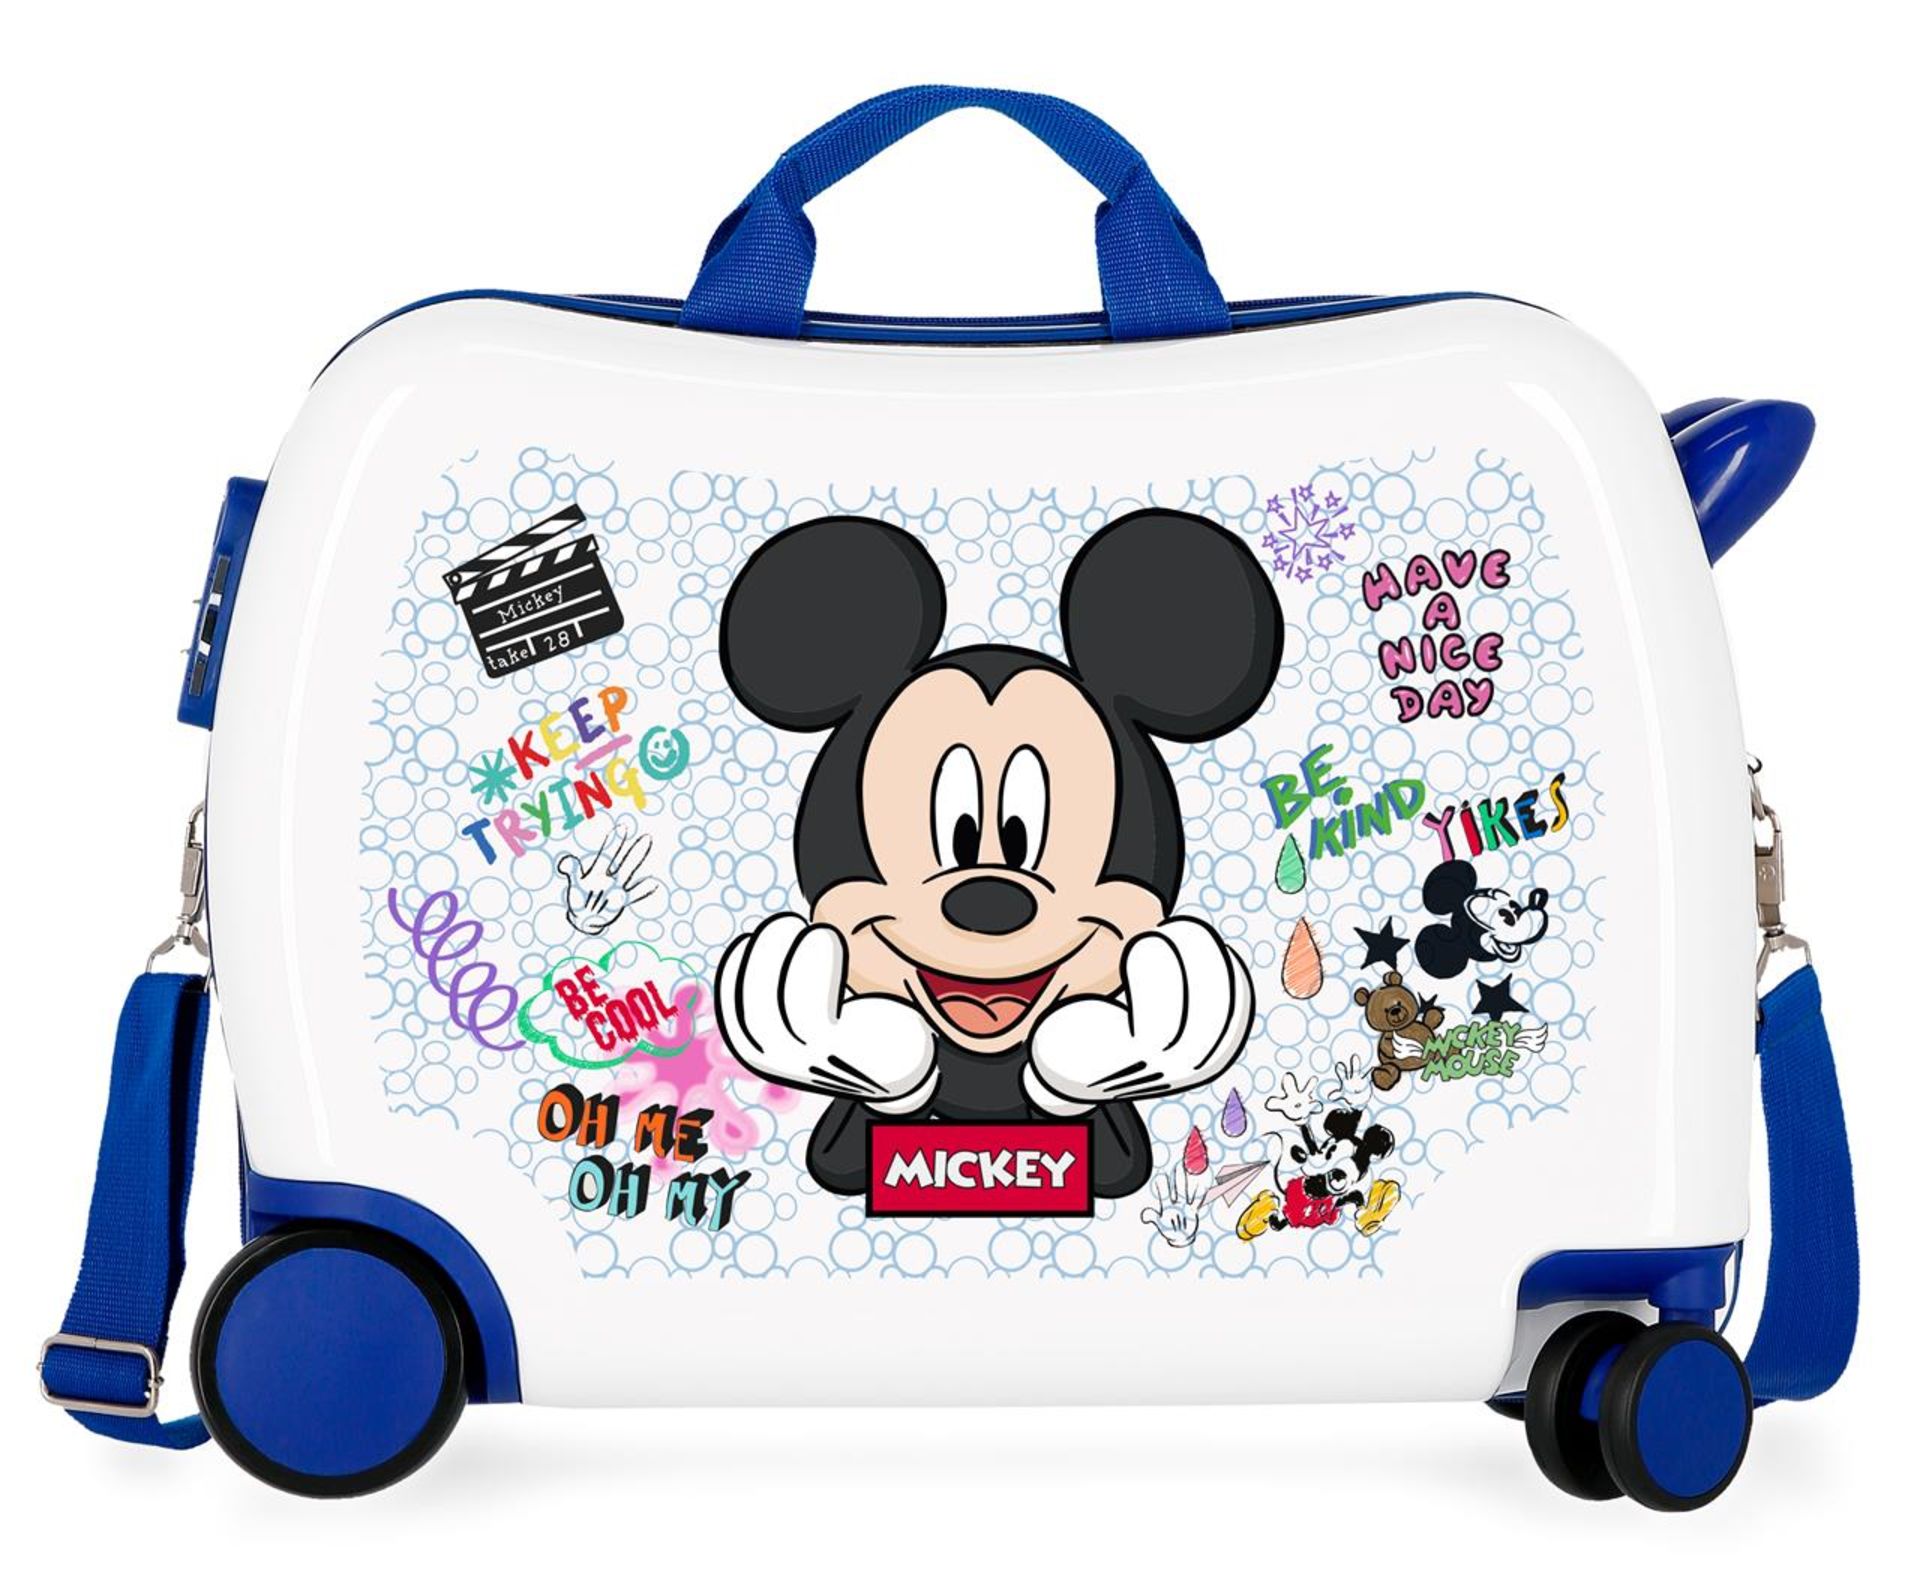 Pallet Of 42 Joumma Bags Rolling Suitcases In Various Disney Designs And Colours 50X38X20 Cm - Image 54 of 102